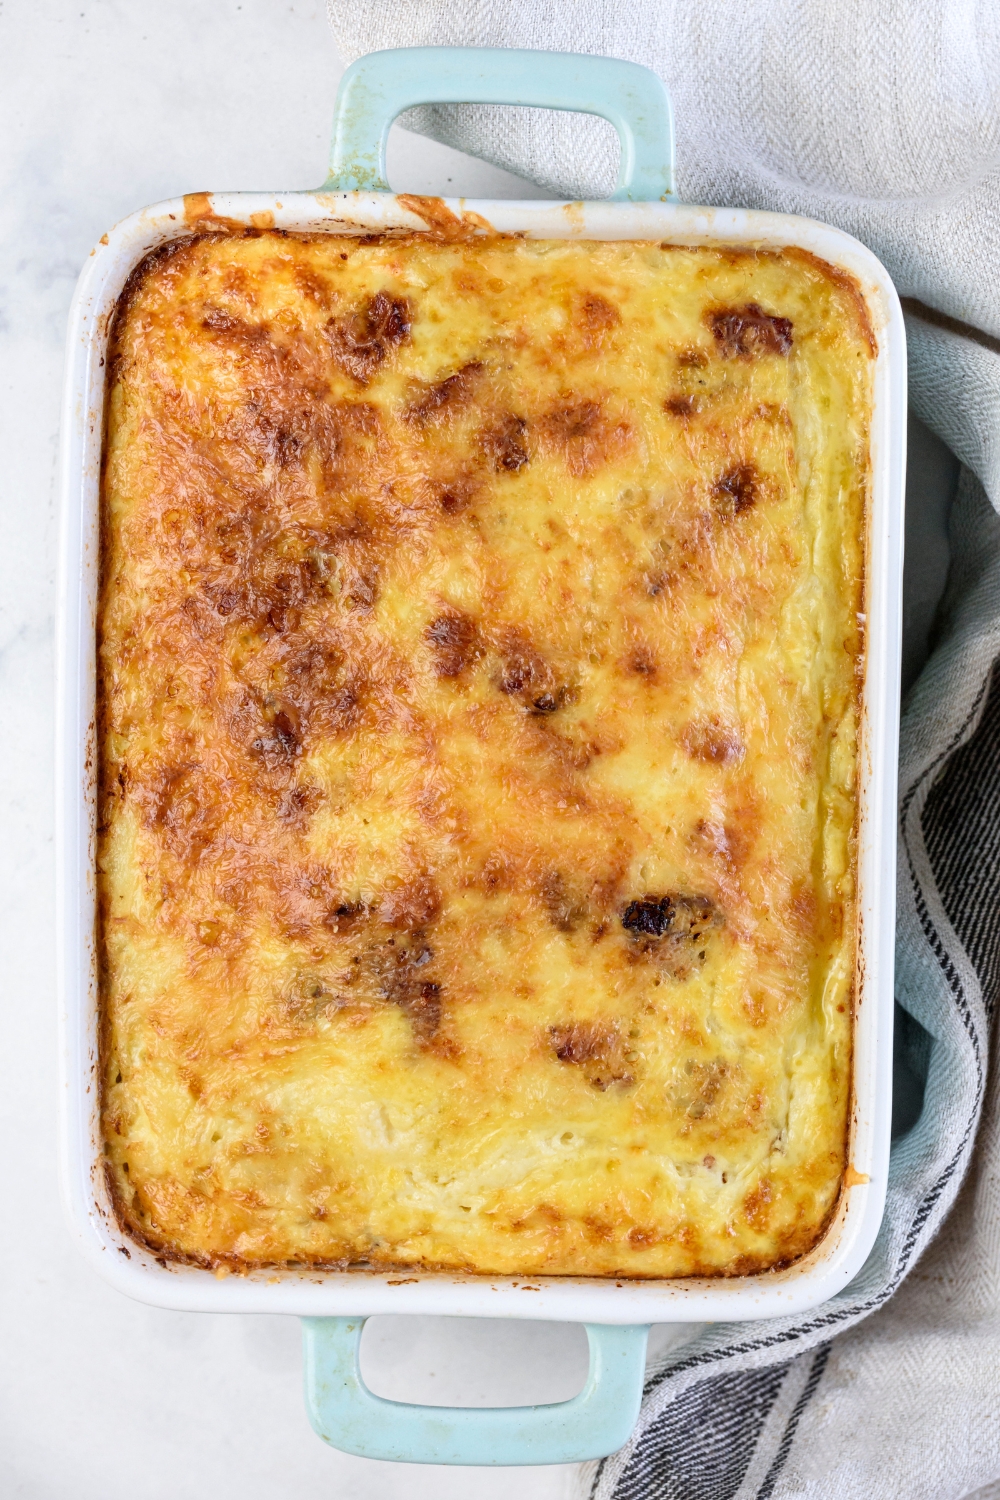 A baking dish filled with a freshly baked casserole covered in a golden brown layer of melted cheese.